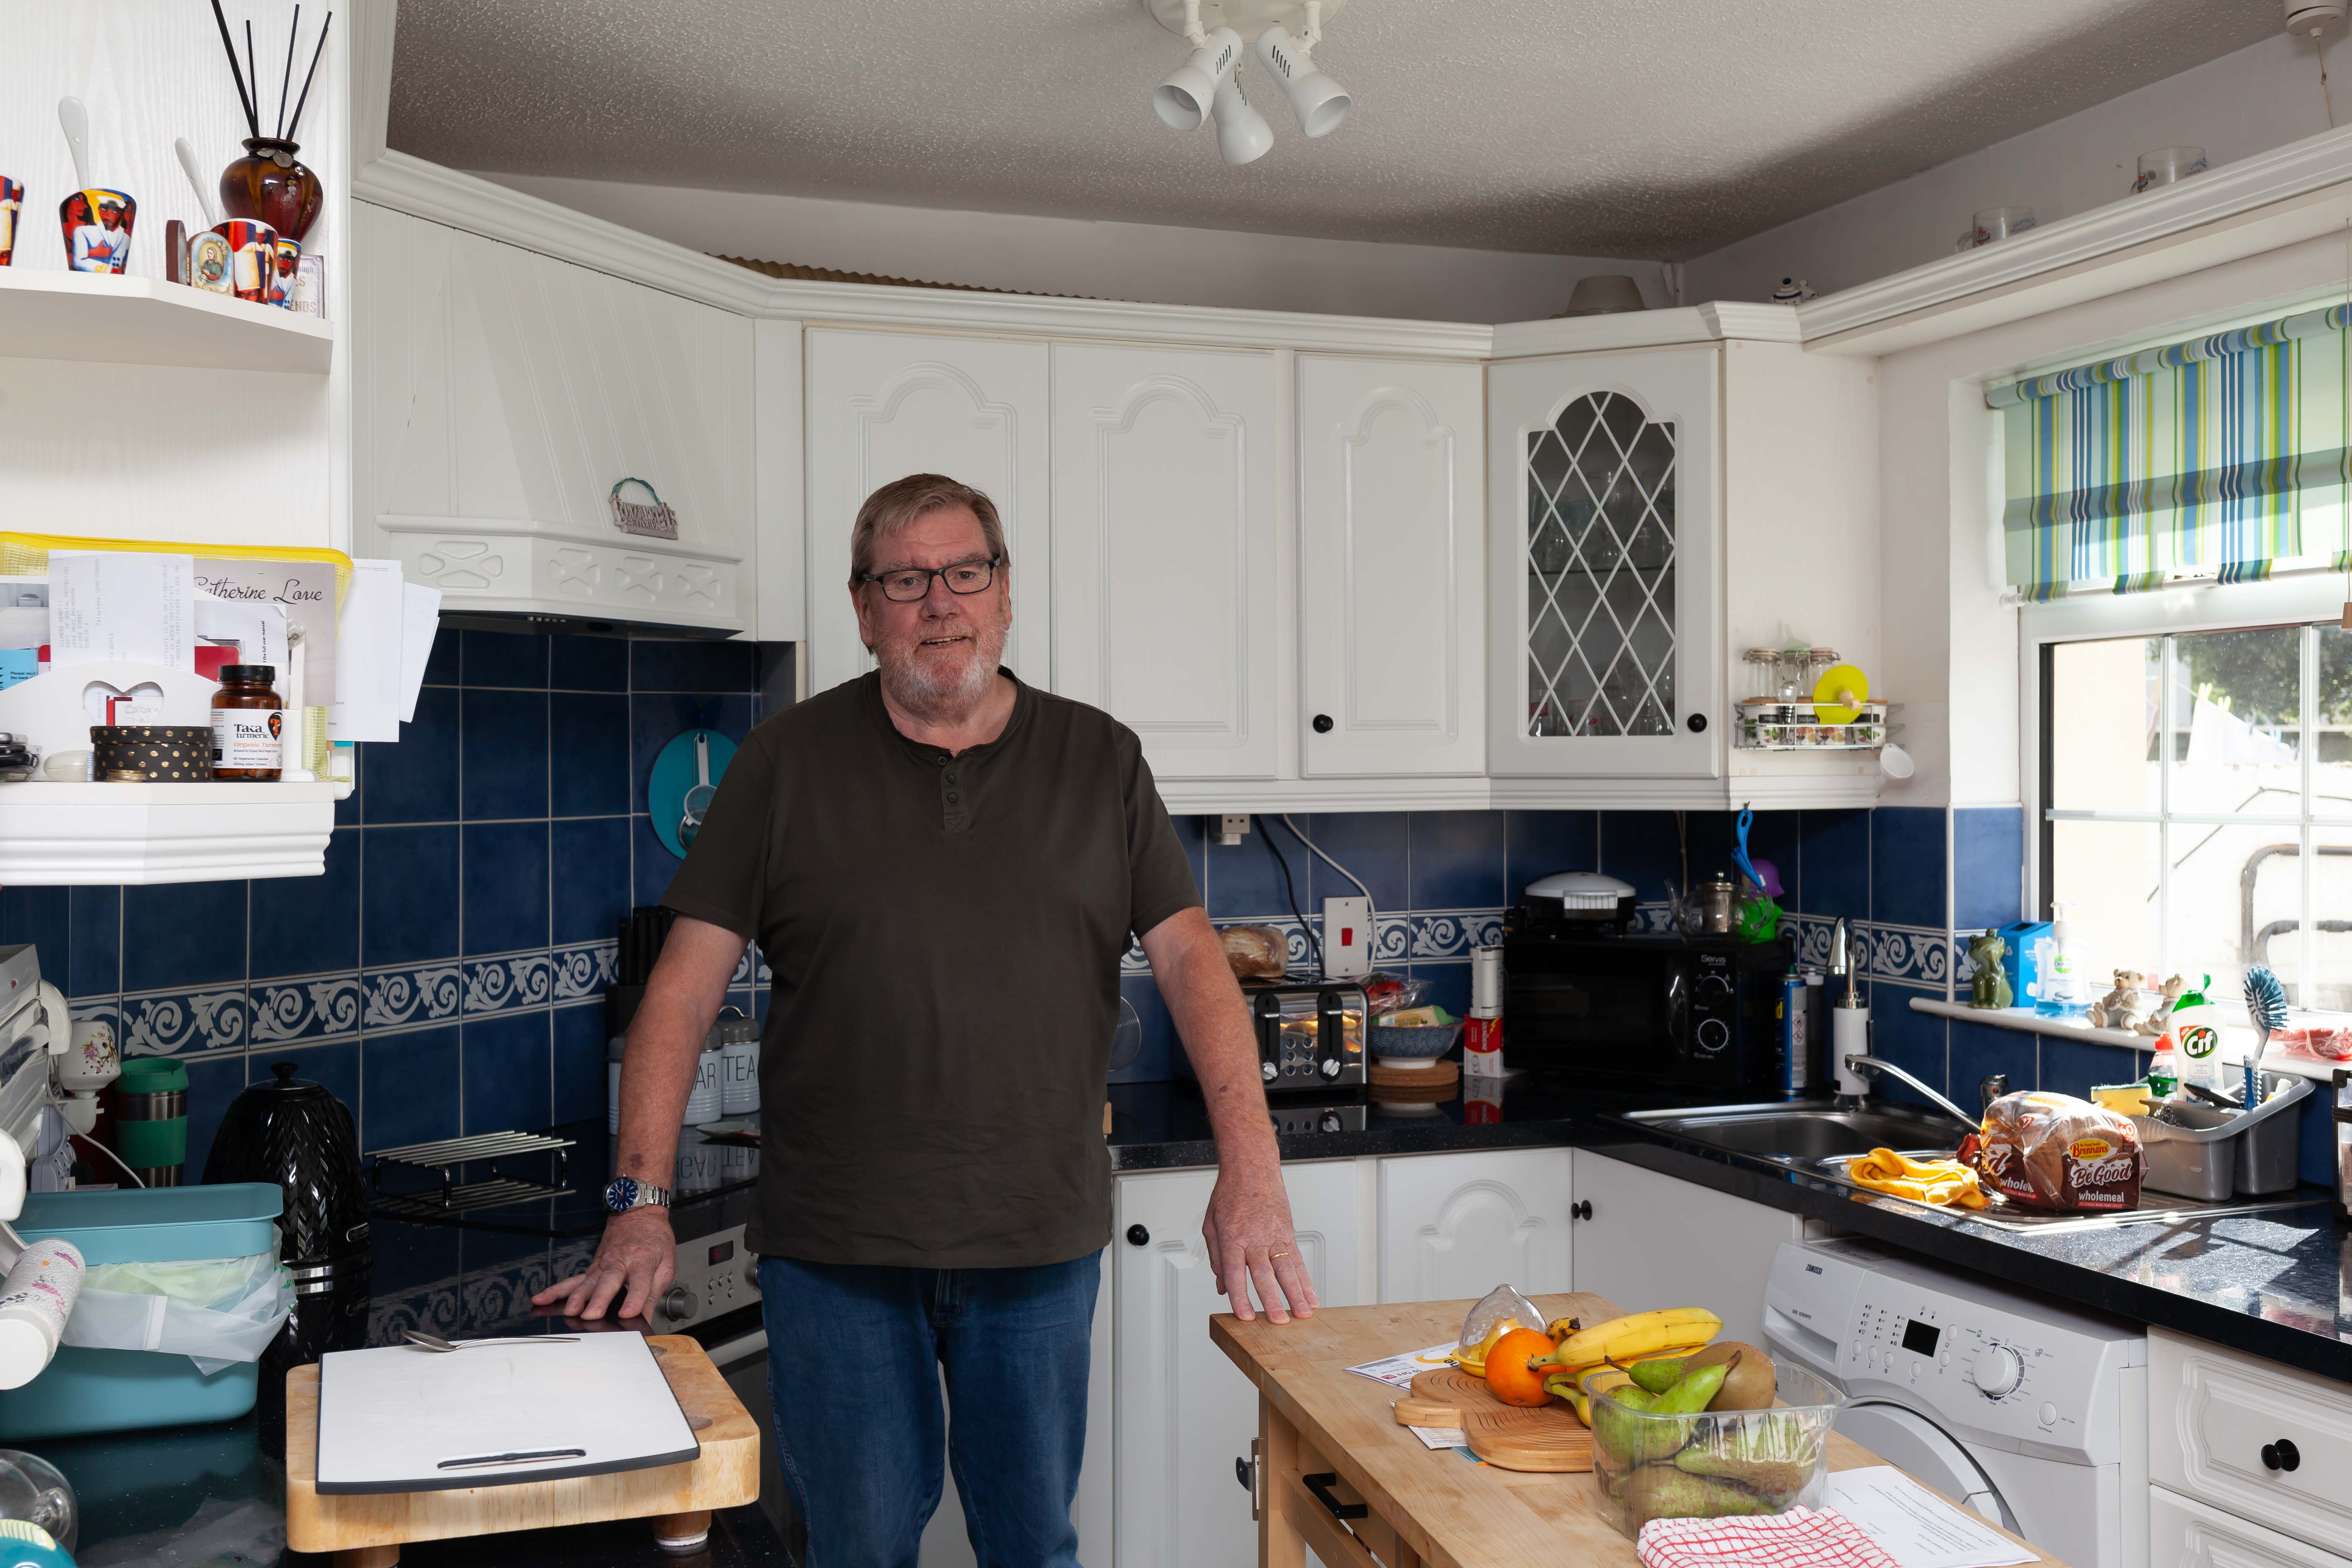 Man standing in kitchen with external wall insulation